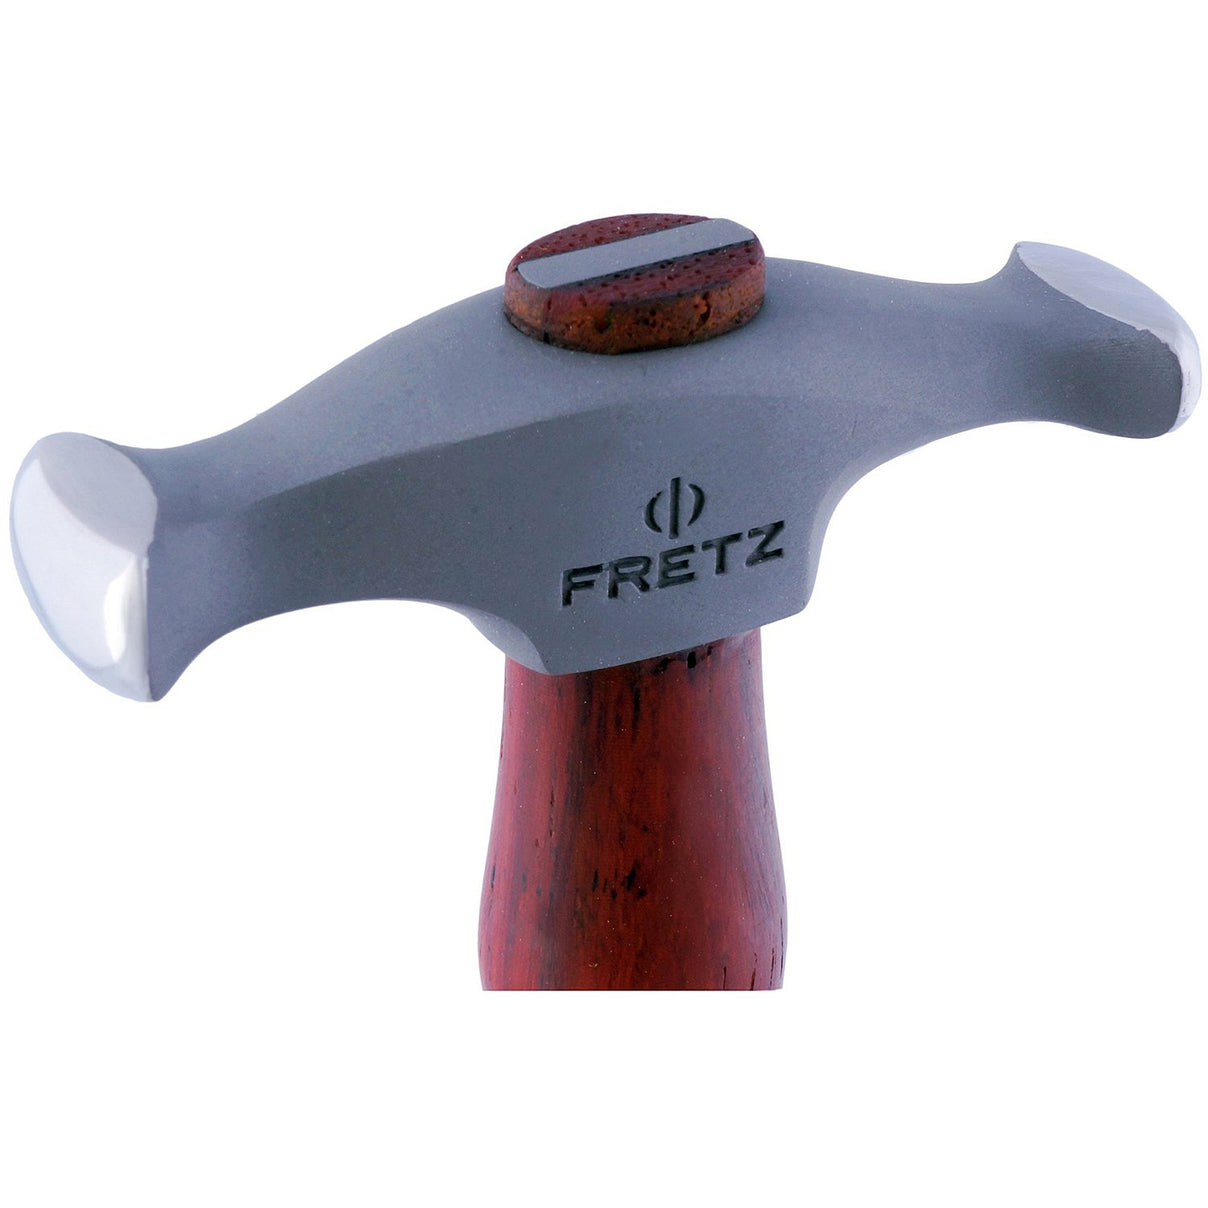 French Hammer - perfect for peening heels and shaping puffs and stiffs